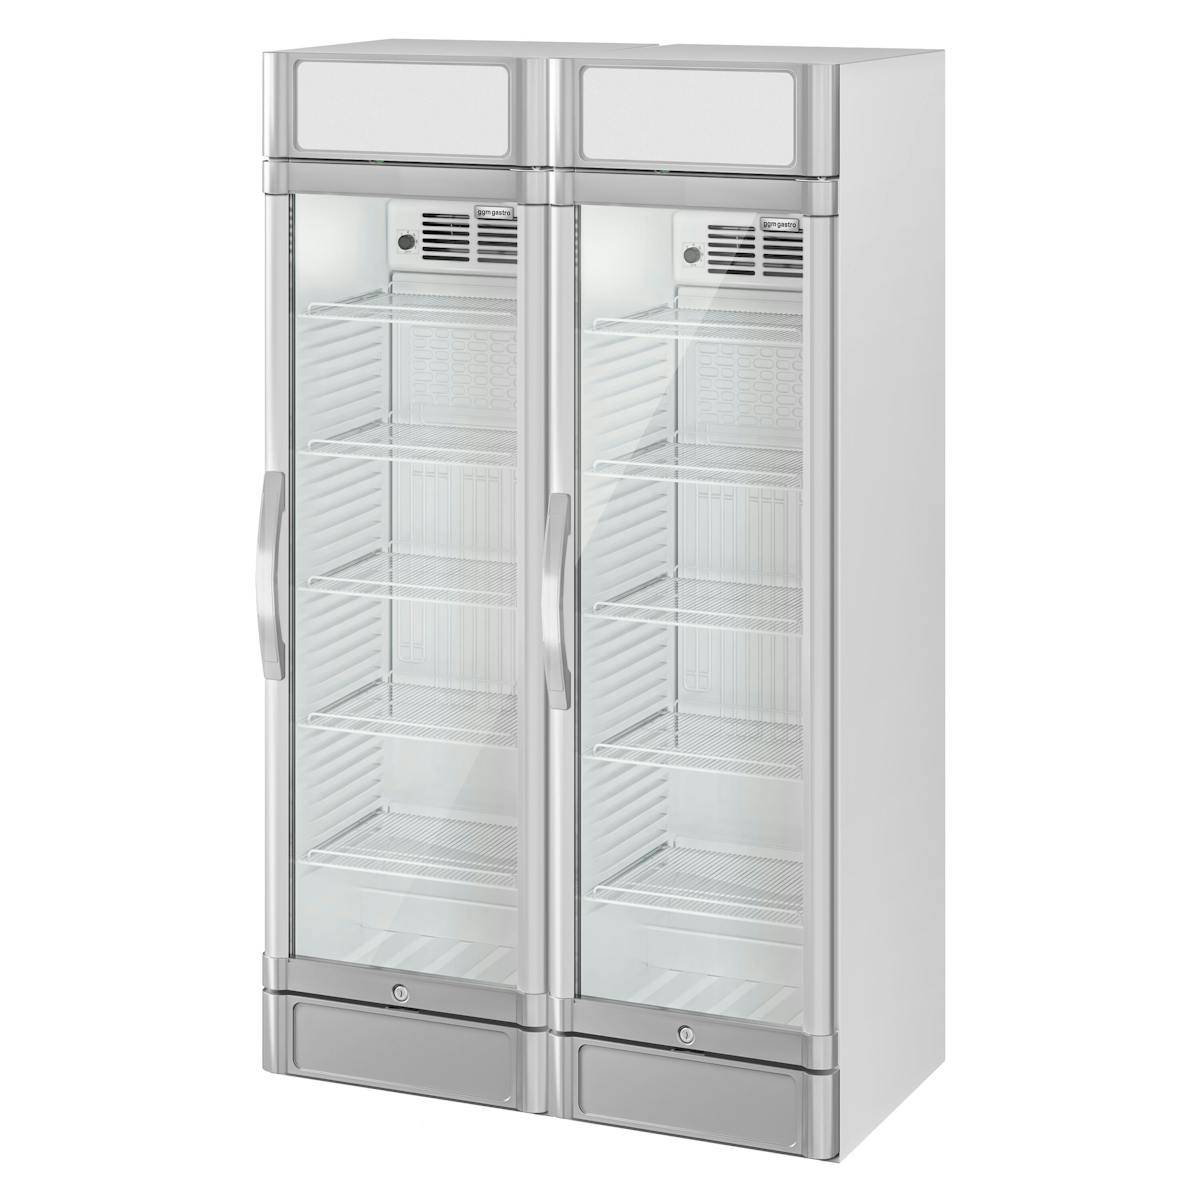 (2 pieces) Beverage refrigerator - 690 litres (total) - white/grey